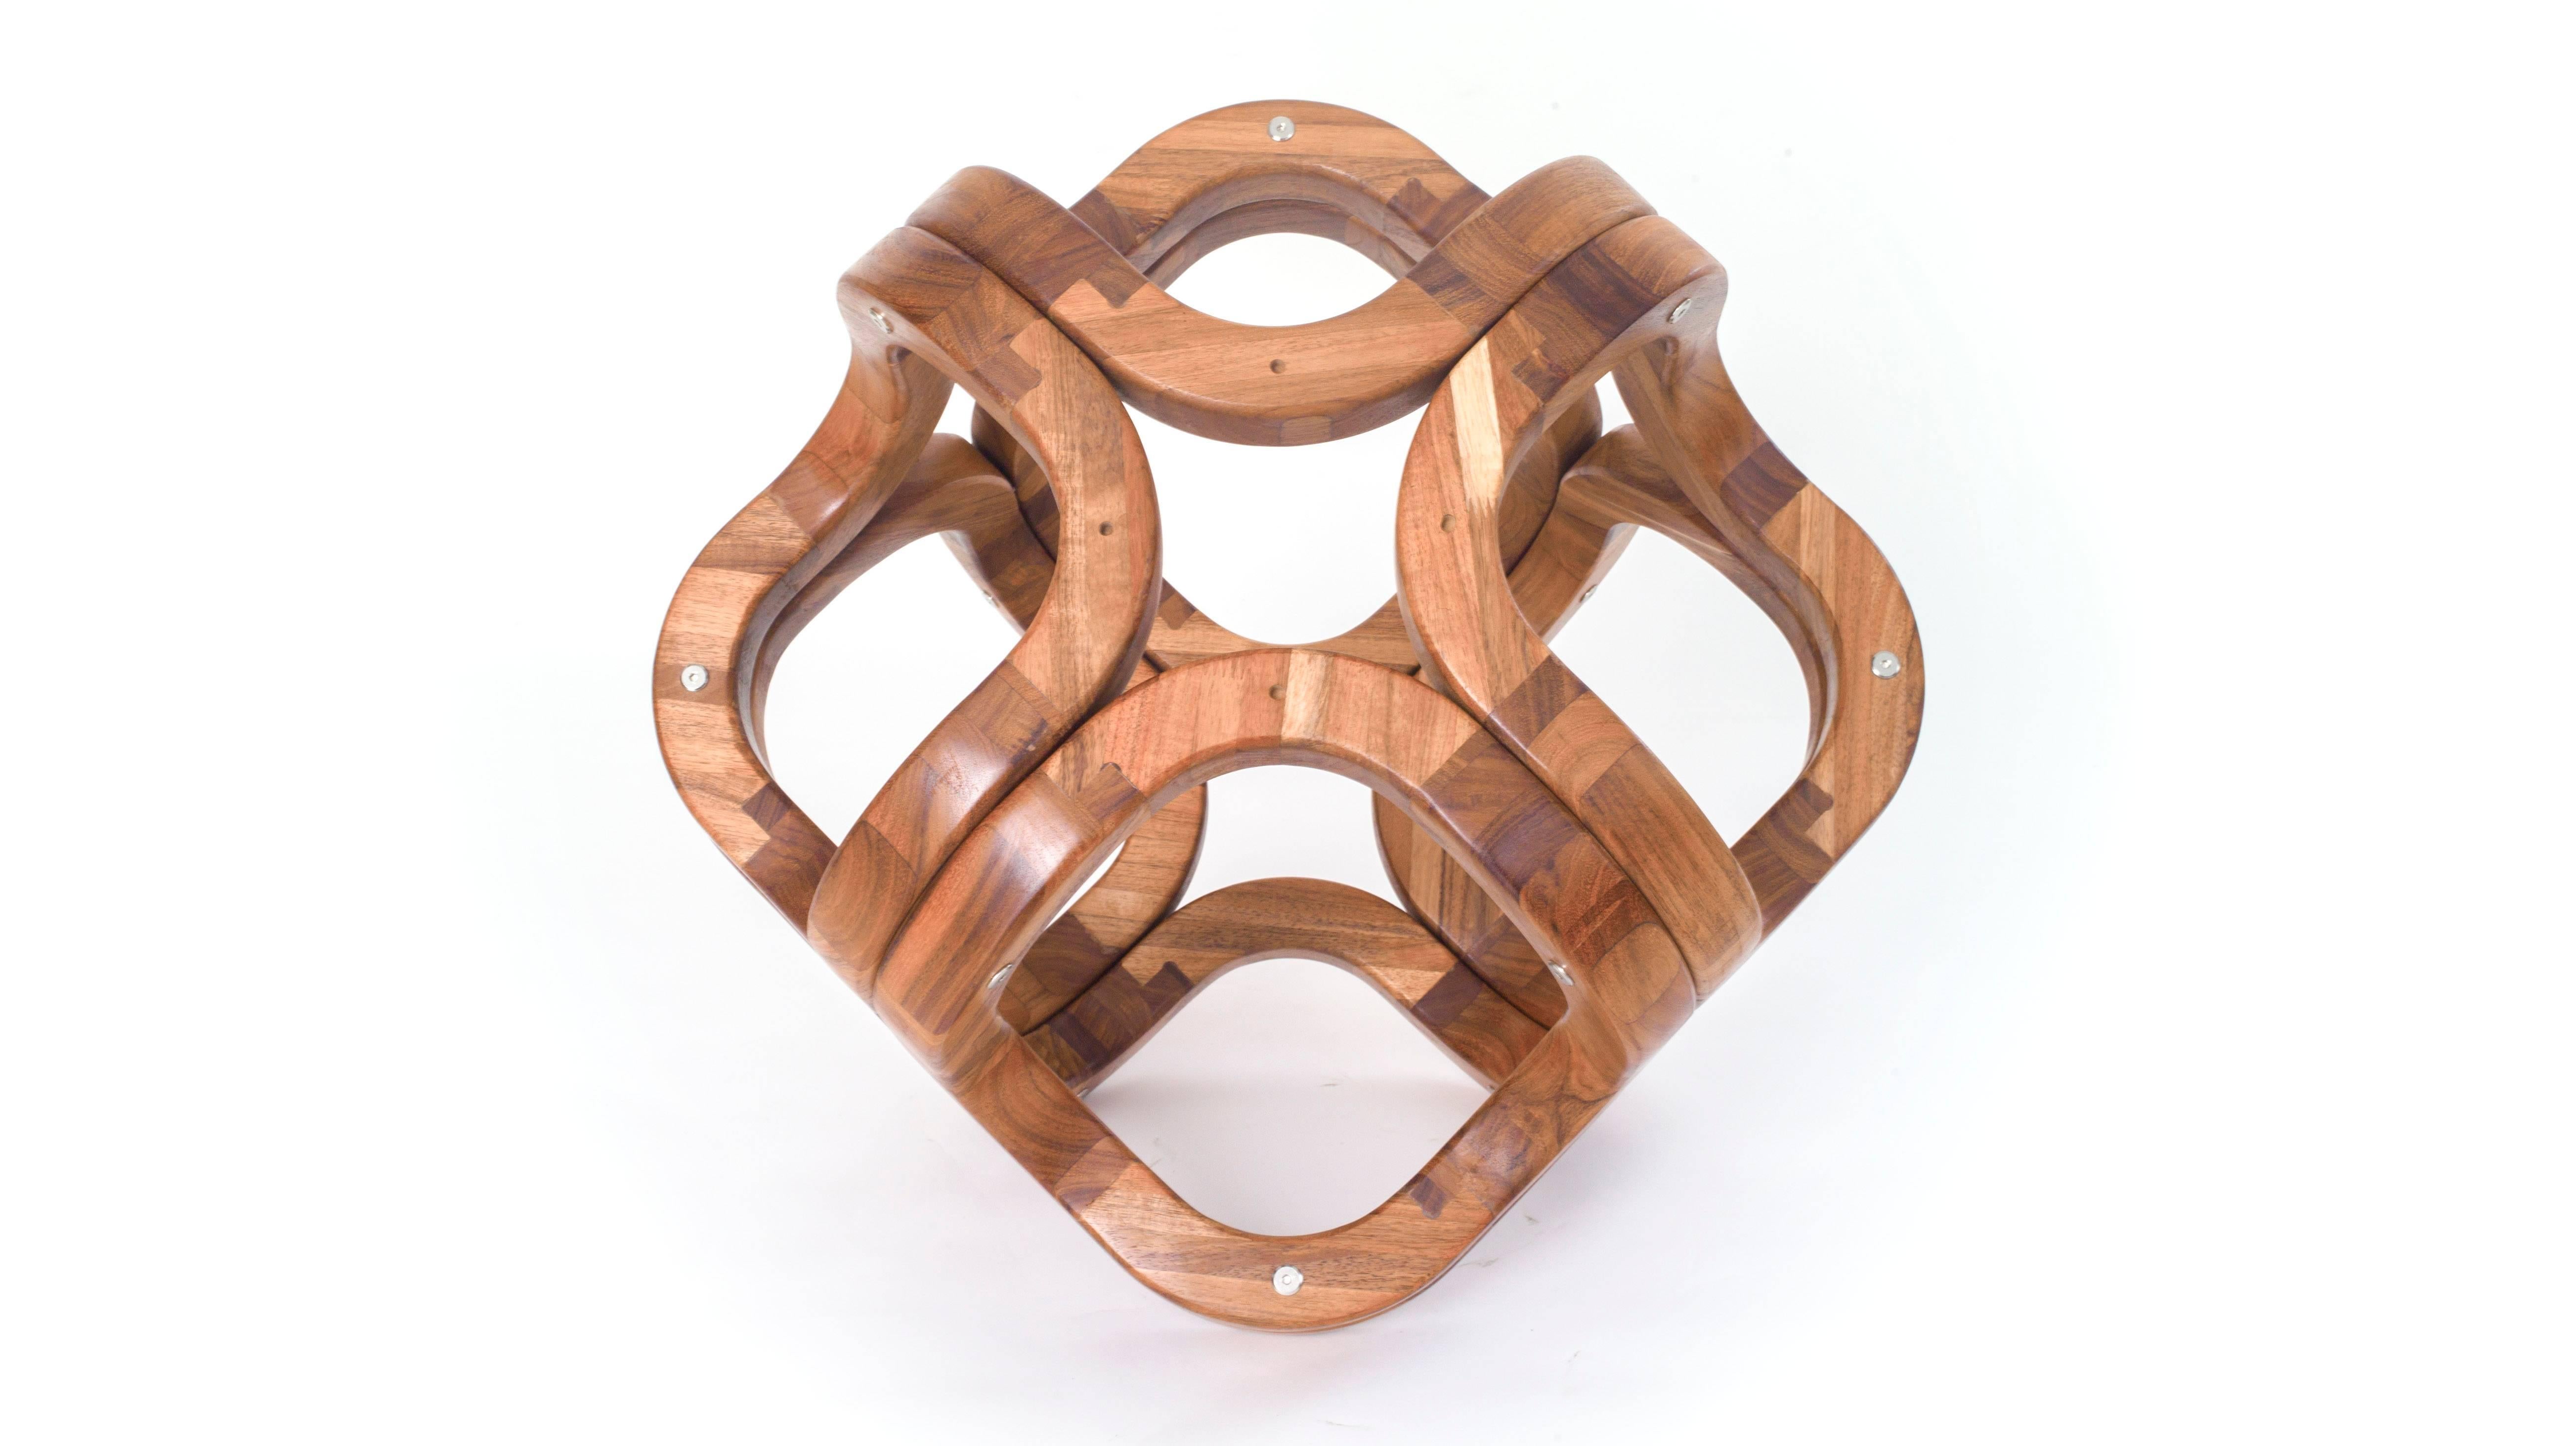 Contemporary Mexican Sculpture in Handcrafted Tzalam Wood Geometric Octahedron  3